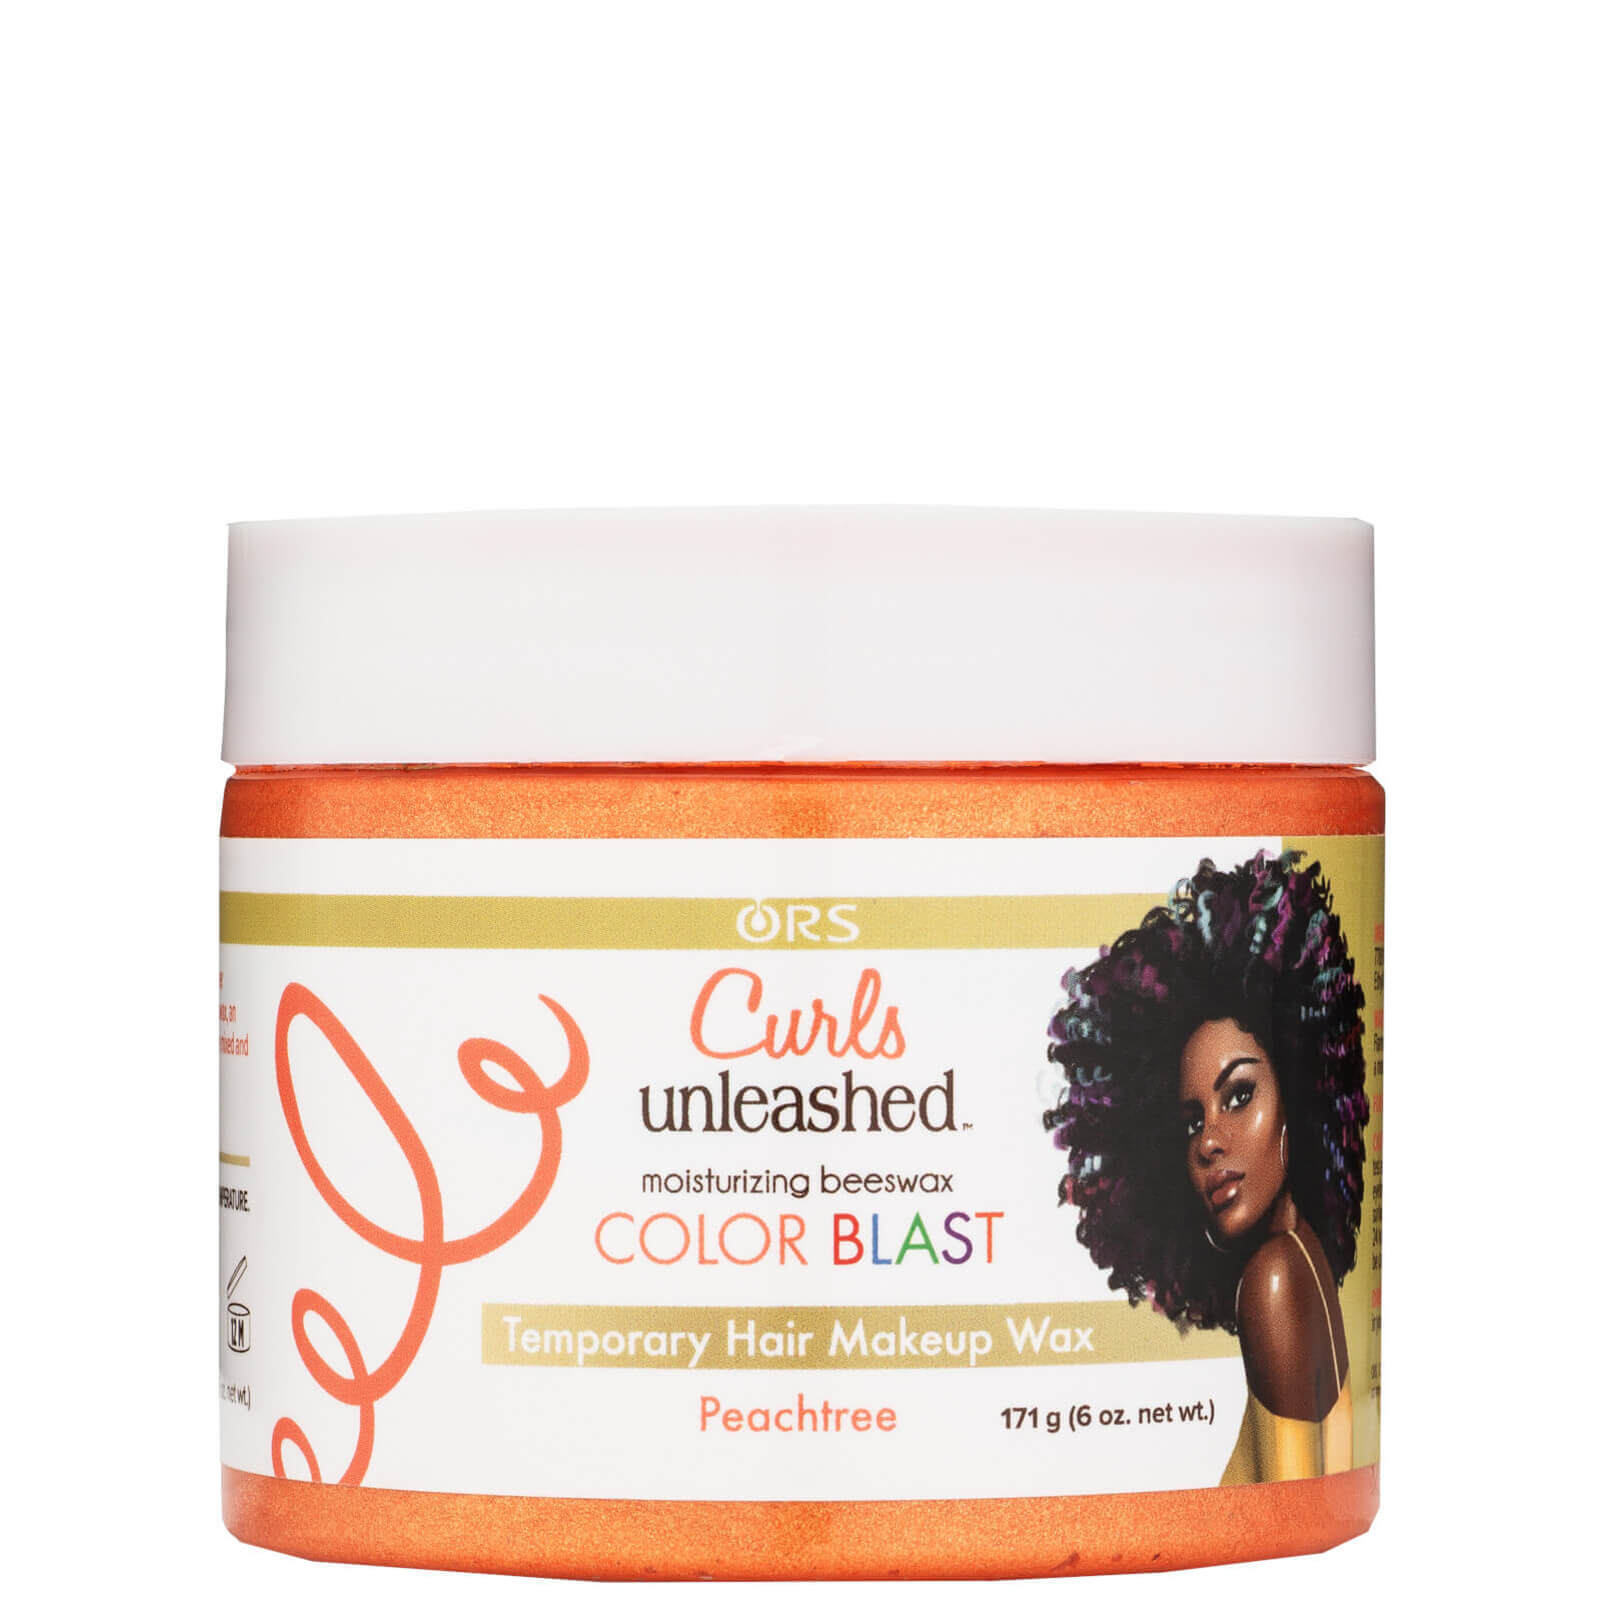 Image of Hair Makeup Wax Curls Unleashed Colour Blast Temporary - Peachtree ORS